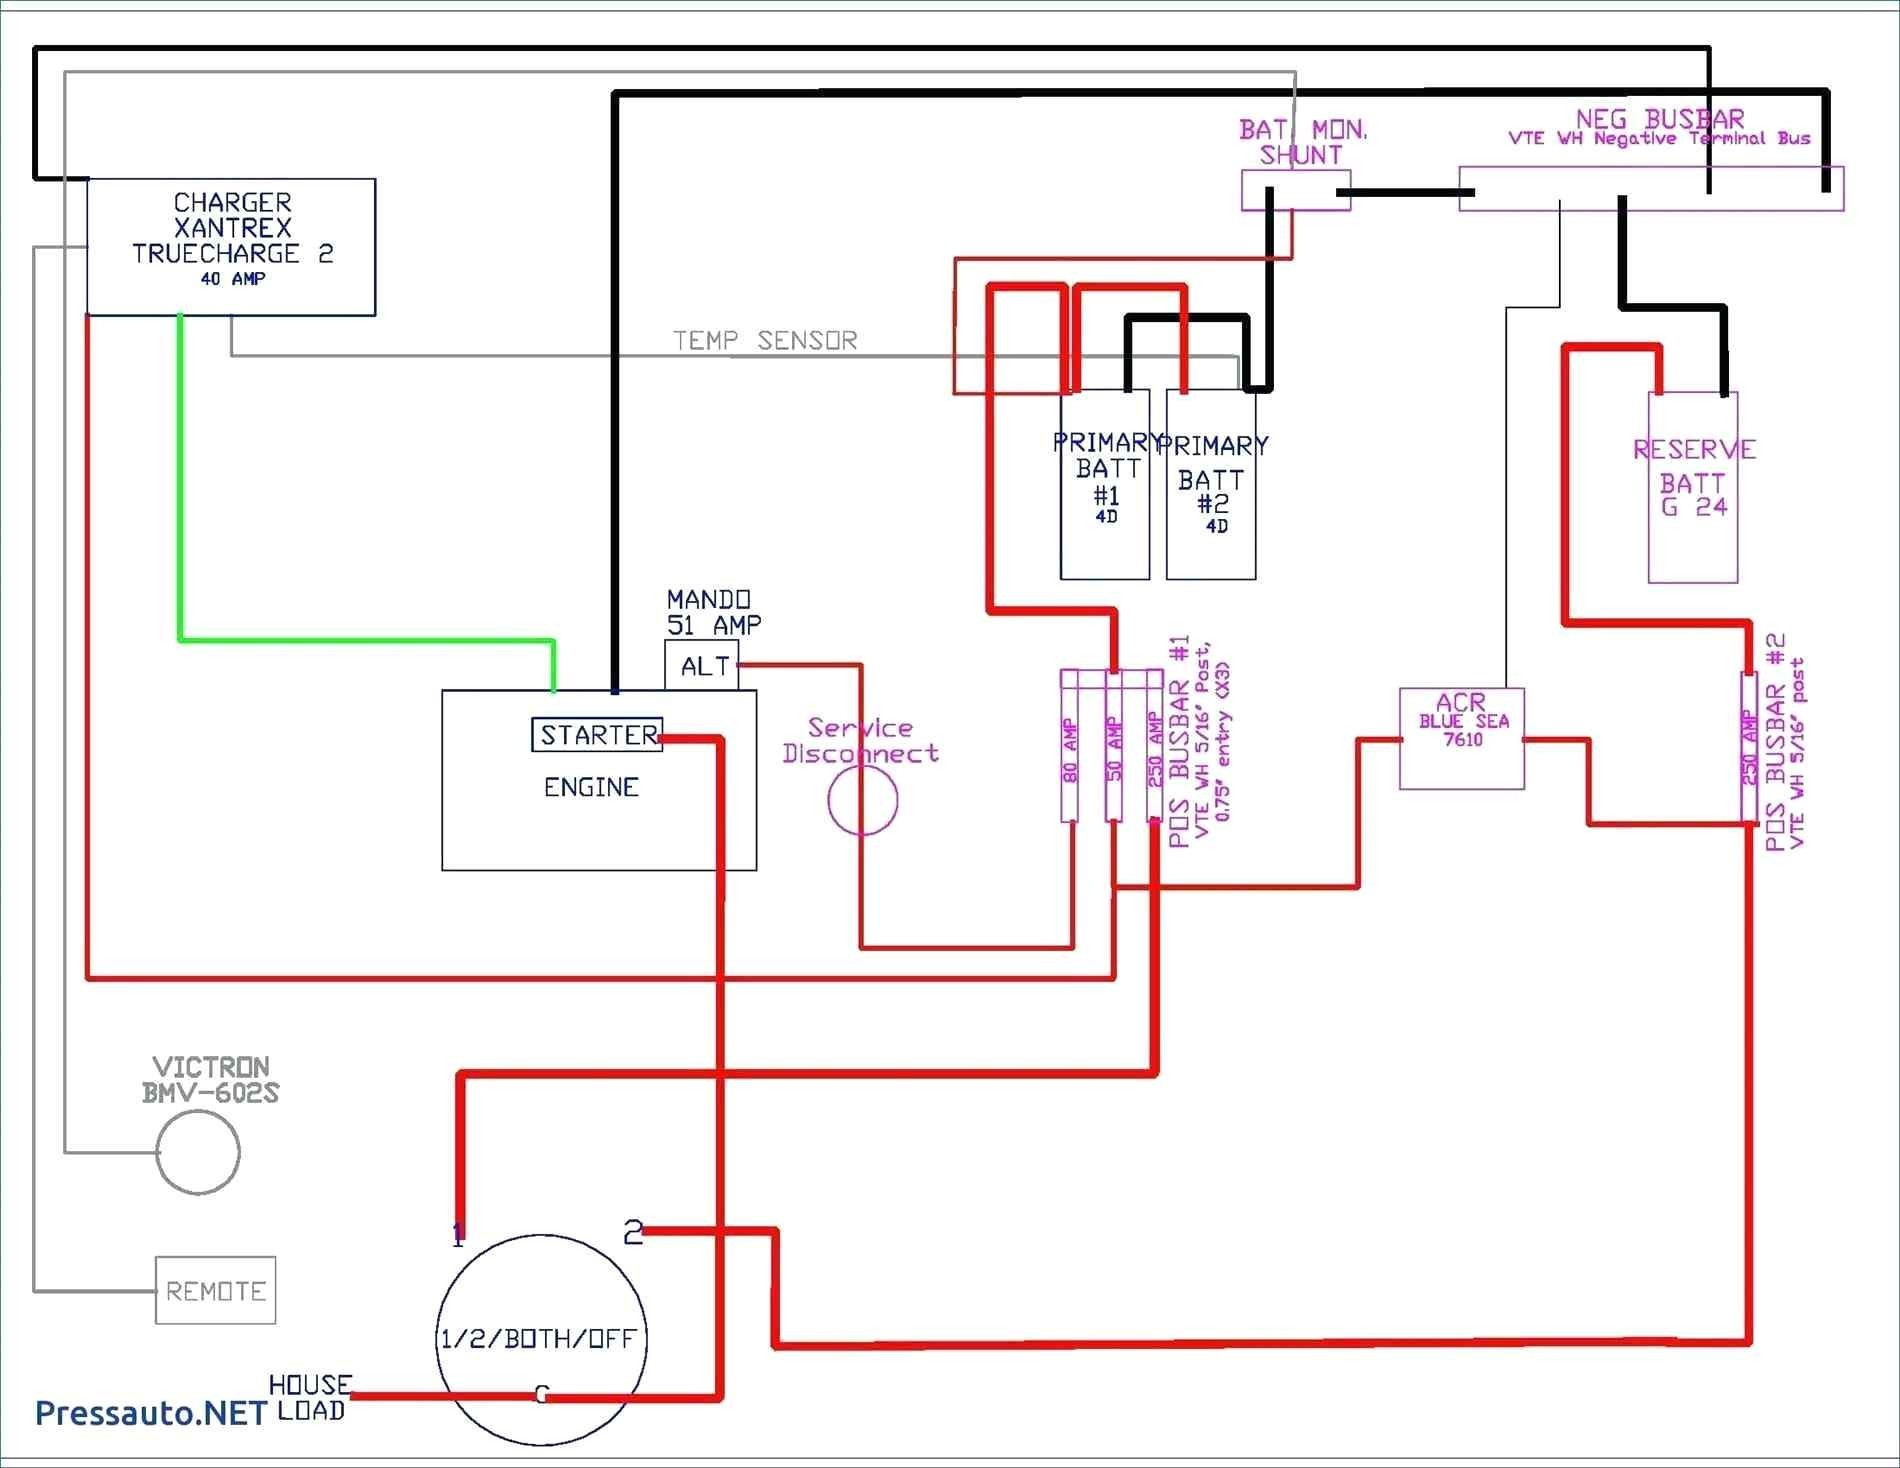 House Wiring Diagrams - Data Wiring Diagram Schematic - Electrical Circuit Diagram House Wiring